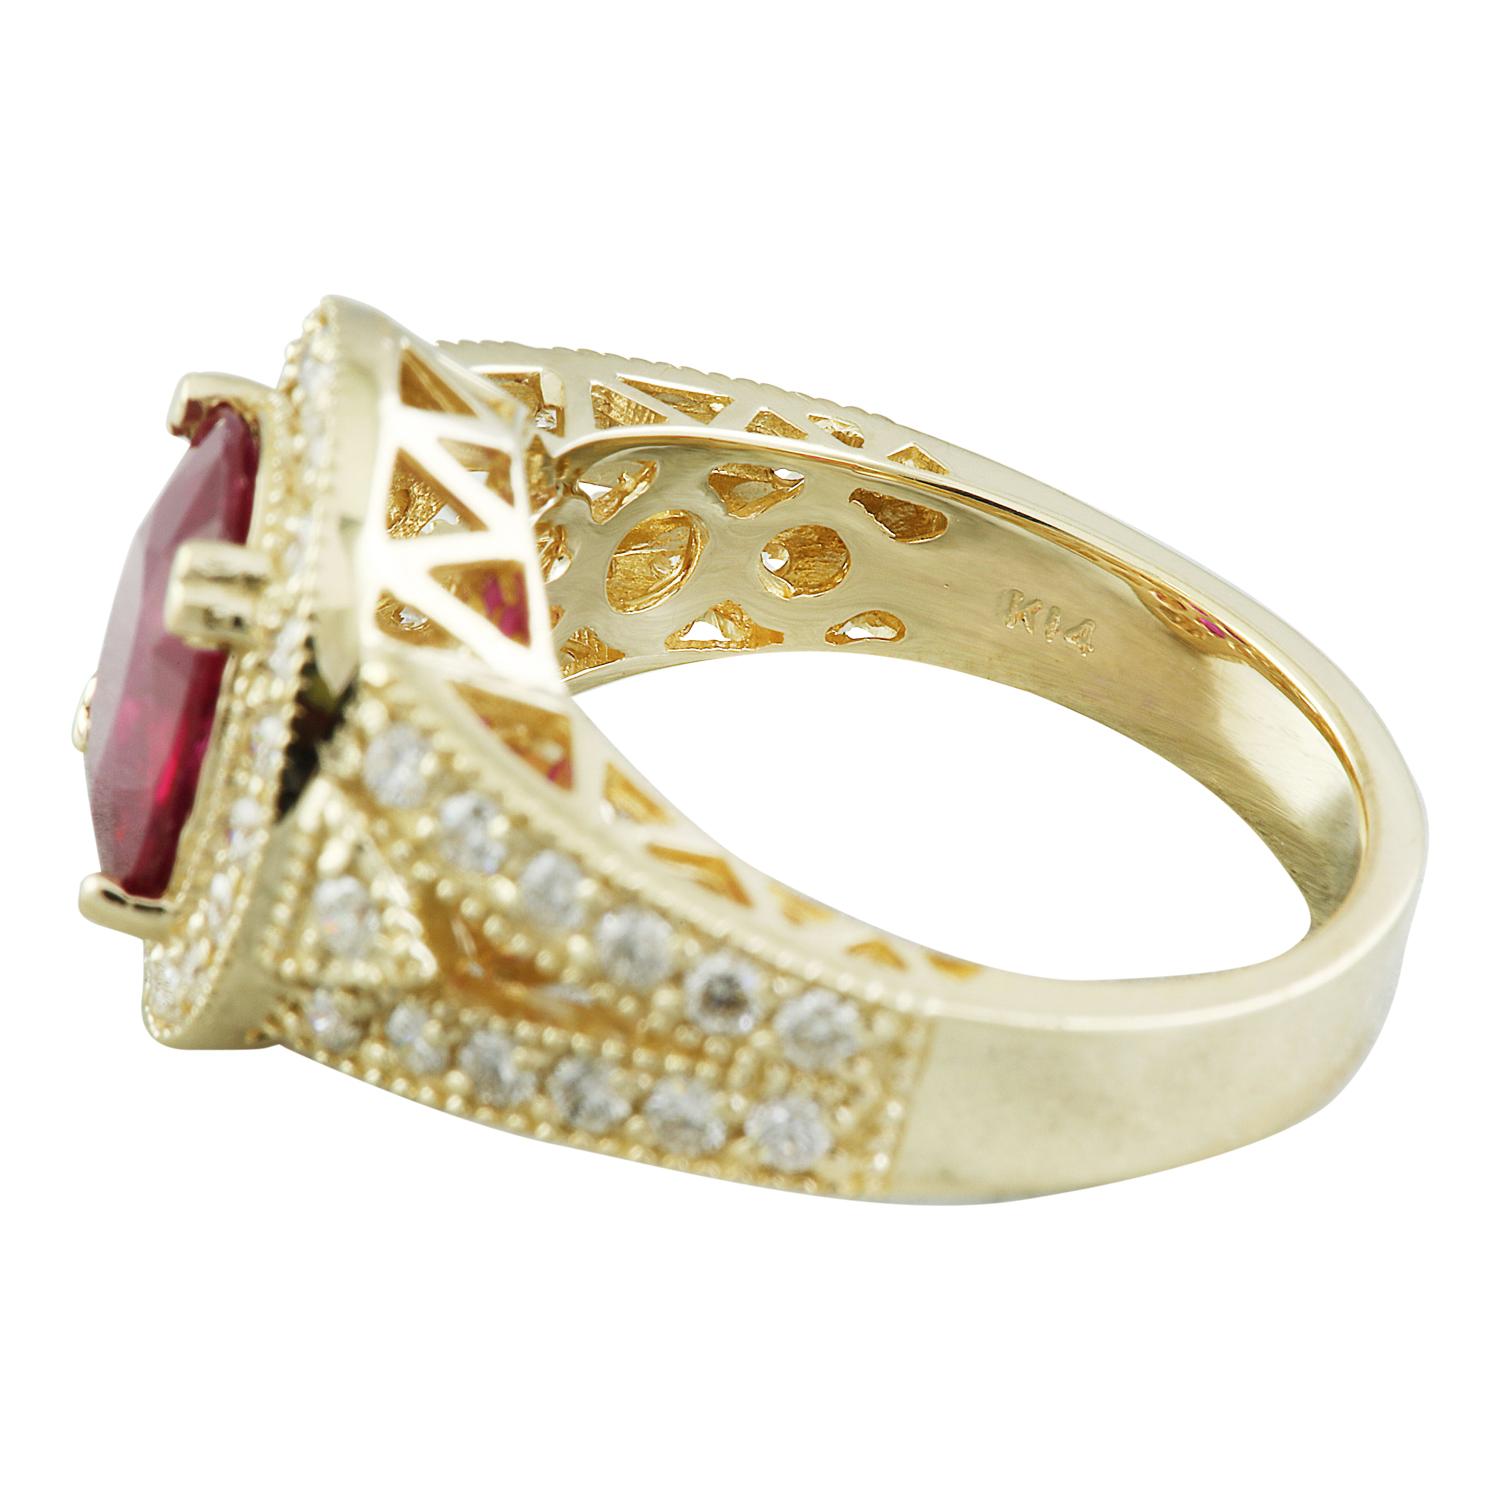 Natural Ruby Diamond Ring In 14 Karat Yellow Gold In New Condition For Sale In Los Angeles, CA